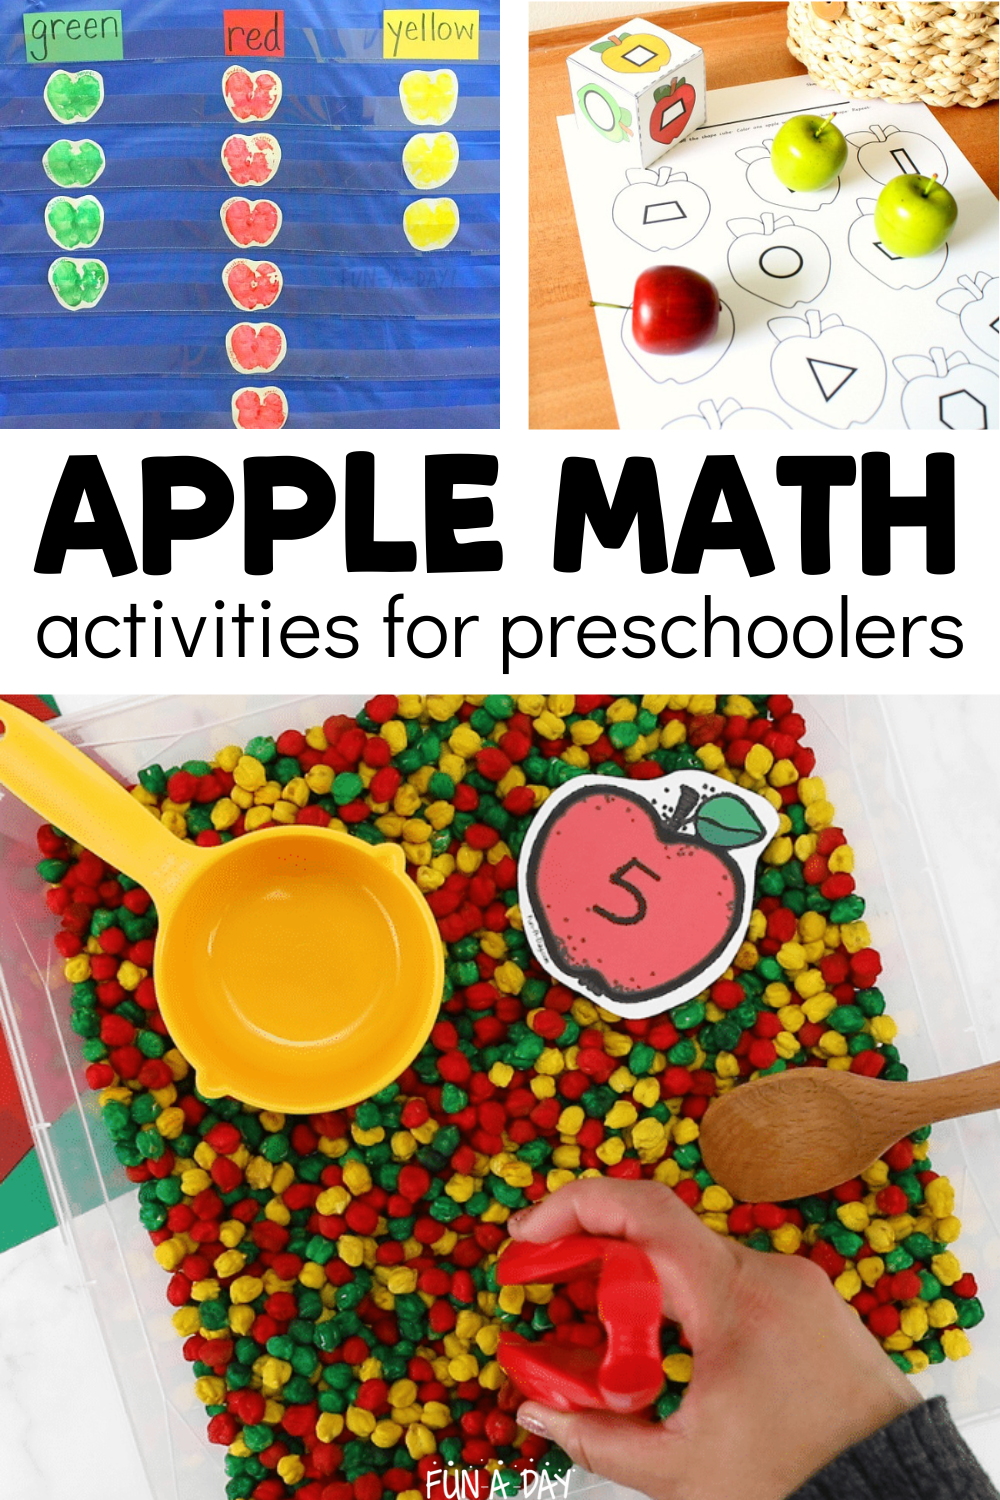 3 apple ideas with text that reads apple math activities for preschoolers